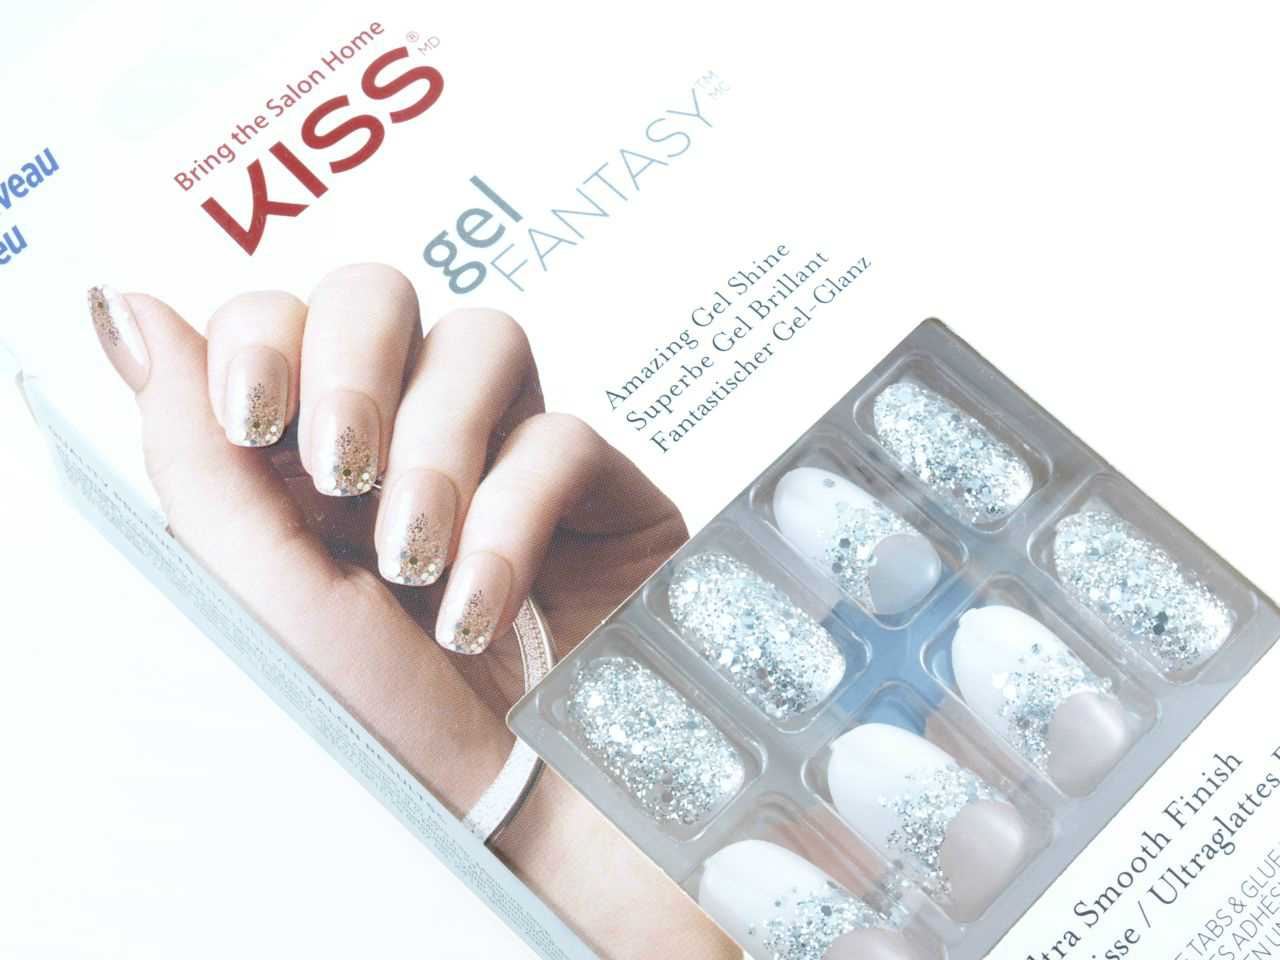 Kiss Gel Fantasy Press-On Nails in "Rock Candy": Review and Swatches